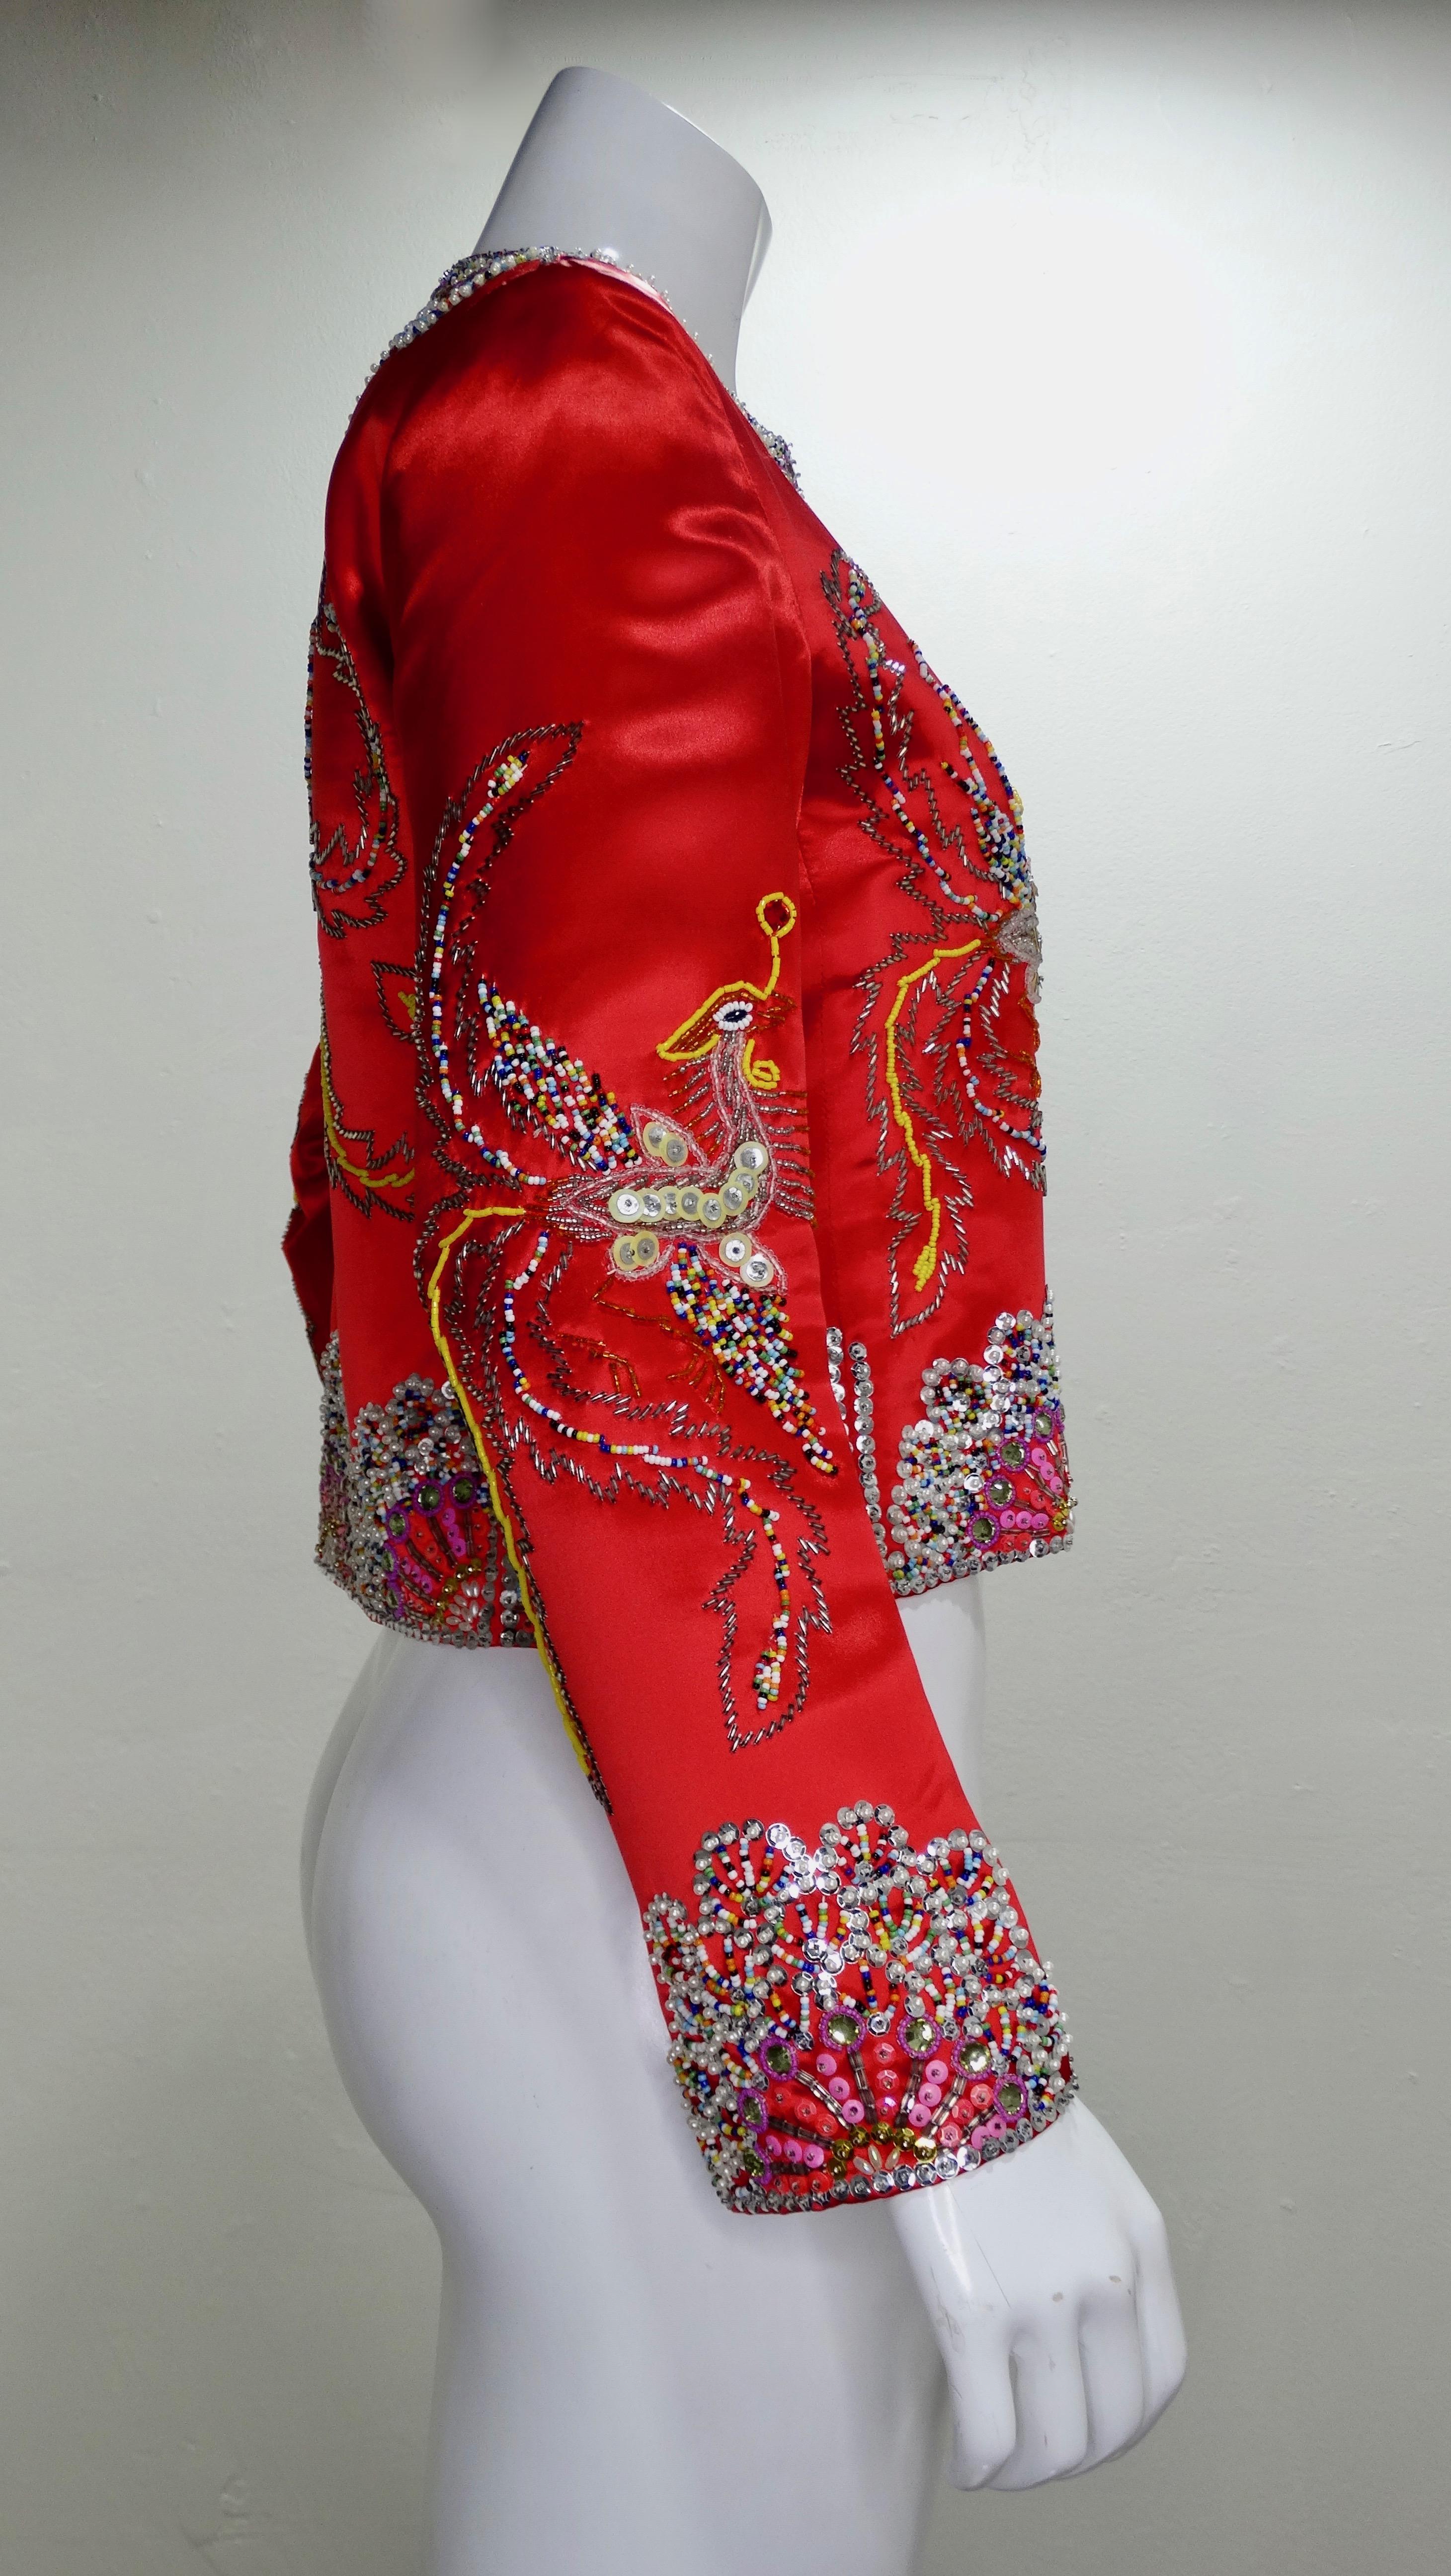 Talk about a true vintage piece! Designed by Dynasty circa 1960s, this red satin cropped jacket is completely hand beaded with a variety of colorful sequins, rhinestones and pearls to form Phoenix motifs on the sleeves and the front/back. A vintage